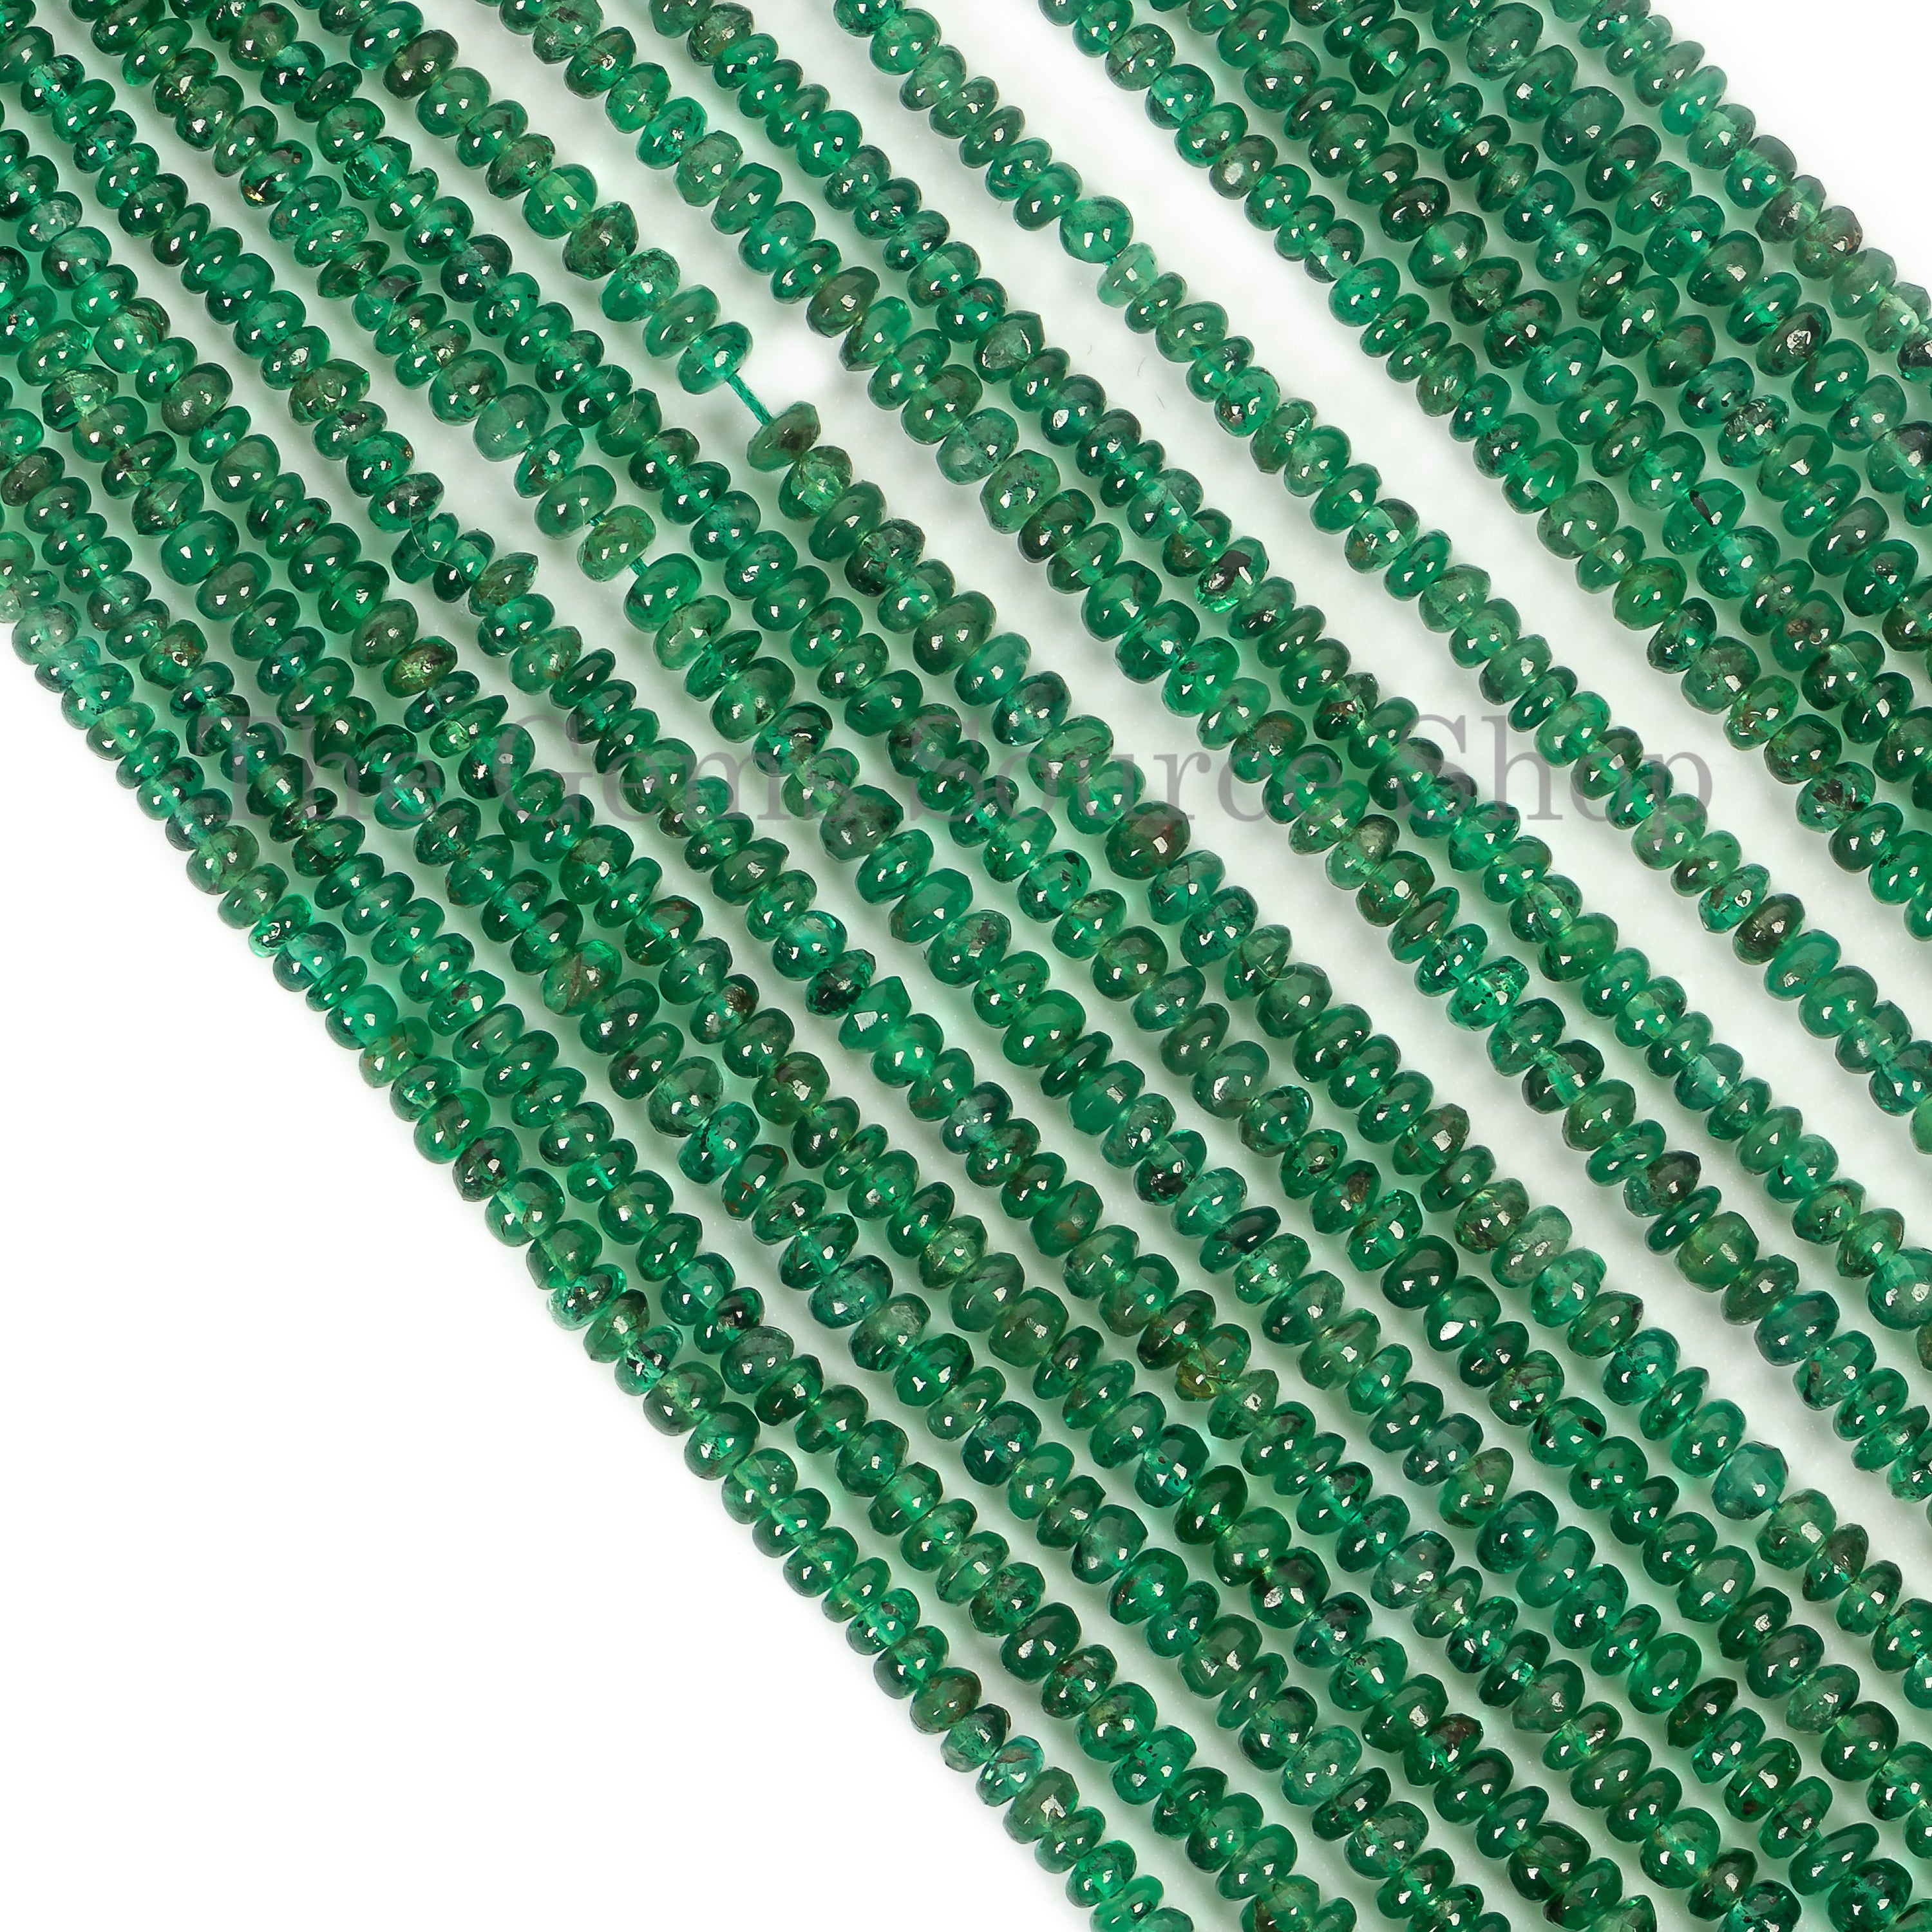 Natural 2-3 mm Emerald Beads, Emerald Rondelle Shape, Emerald Smooth Beads, Emerald Gemstone Beads